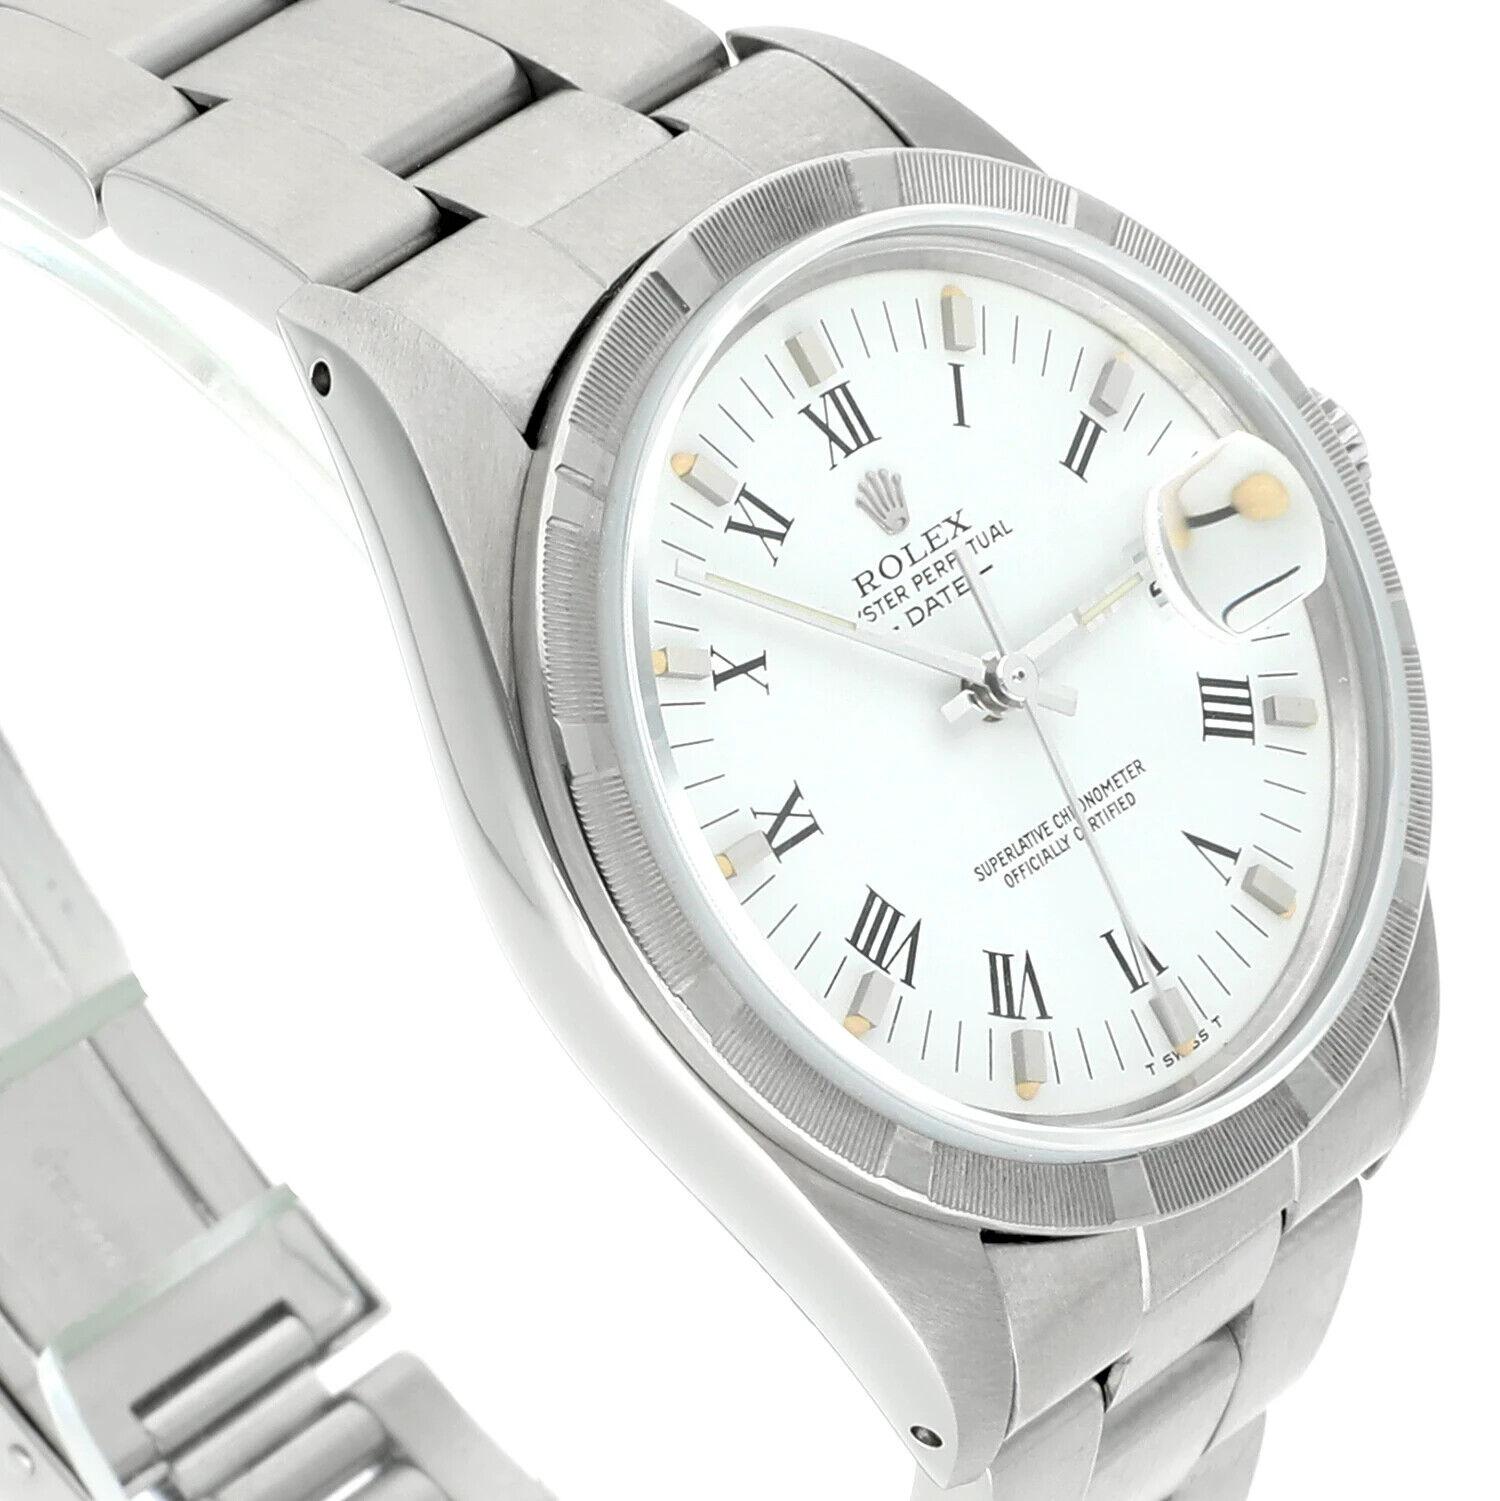 Unisex Rolex Date Stainless Steel Watch Oyster White Roman Dial 15010 Circa 1988 In Excellent Condition For Sale In New York, NY